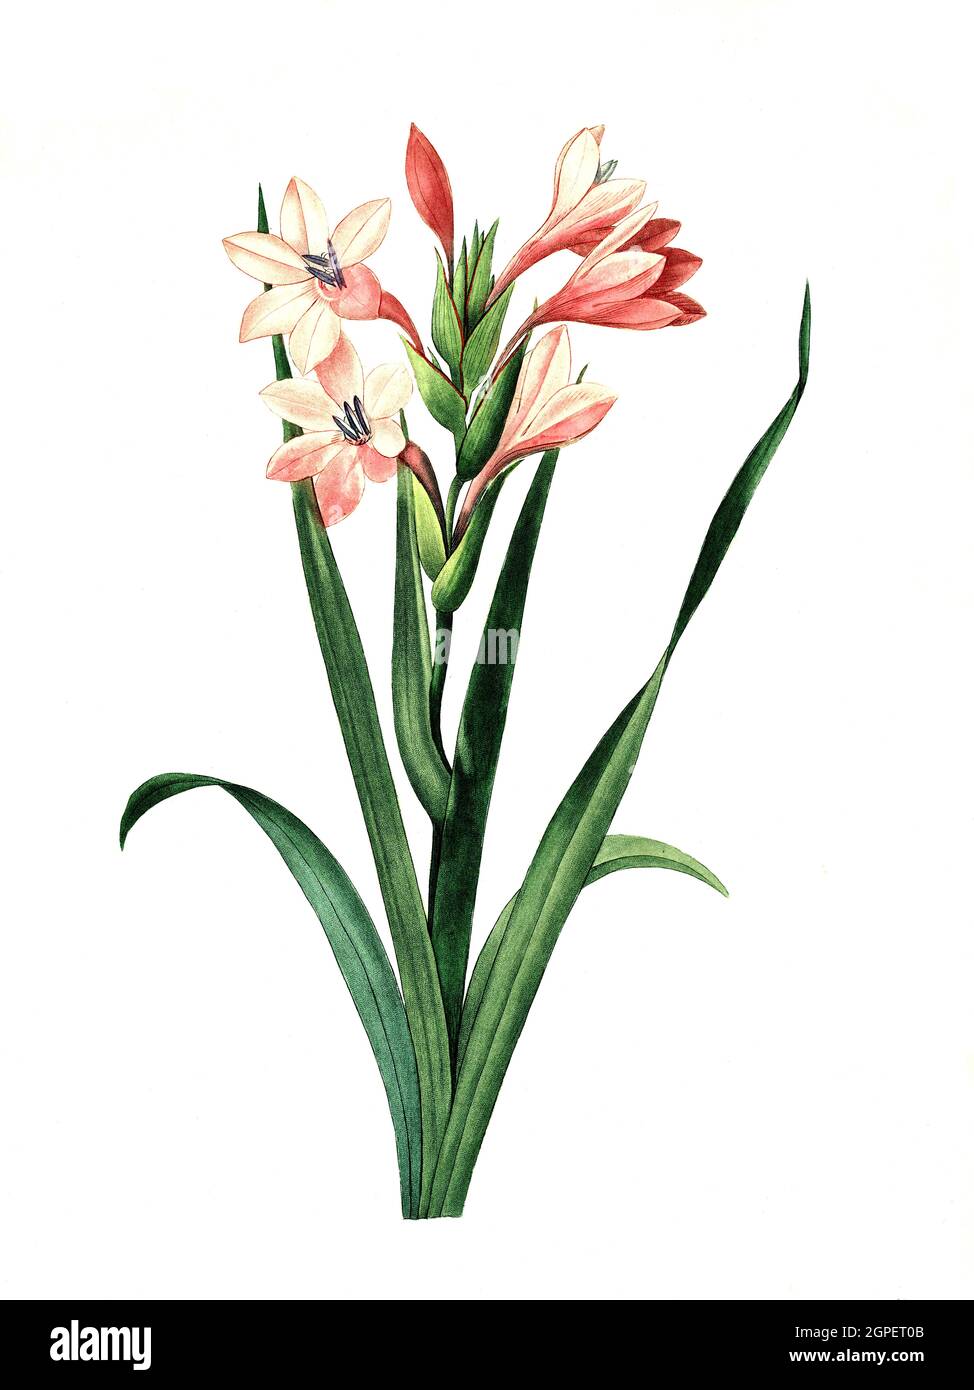 Acker-Gladiole, Gladiolus italicus  /  Gladiolus italicus is a species of gladiolus known by the common names Italian gladiolus, field gladiolus, and common sword-lily, Digital aufbereitete Reproduktion einer Aquarellzeichnung aus dem Jahre 1827, von P.J.Redoue, Kupfertafel  /  Digitally processed reproduction of a watercolor drawing from 1827, by P.J. Redoue, copper plate, Originaldatum unbekannt Stock Photo